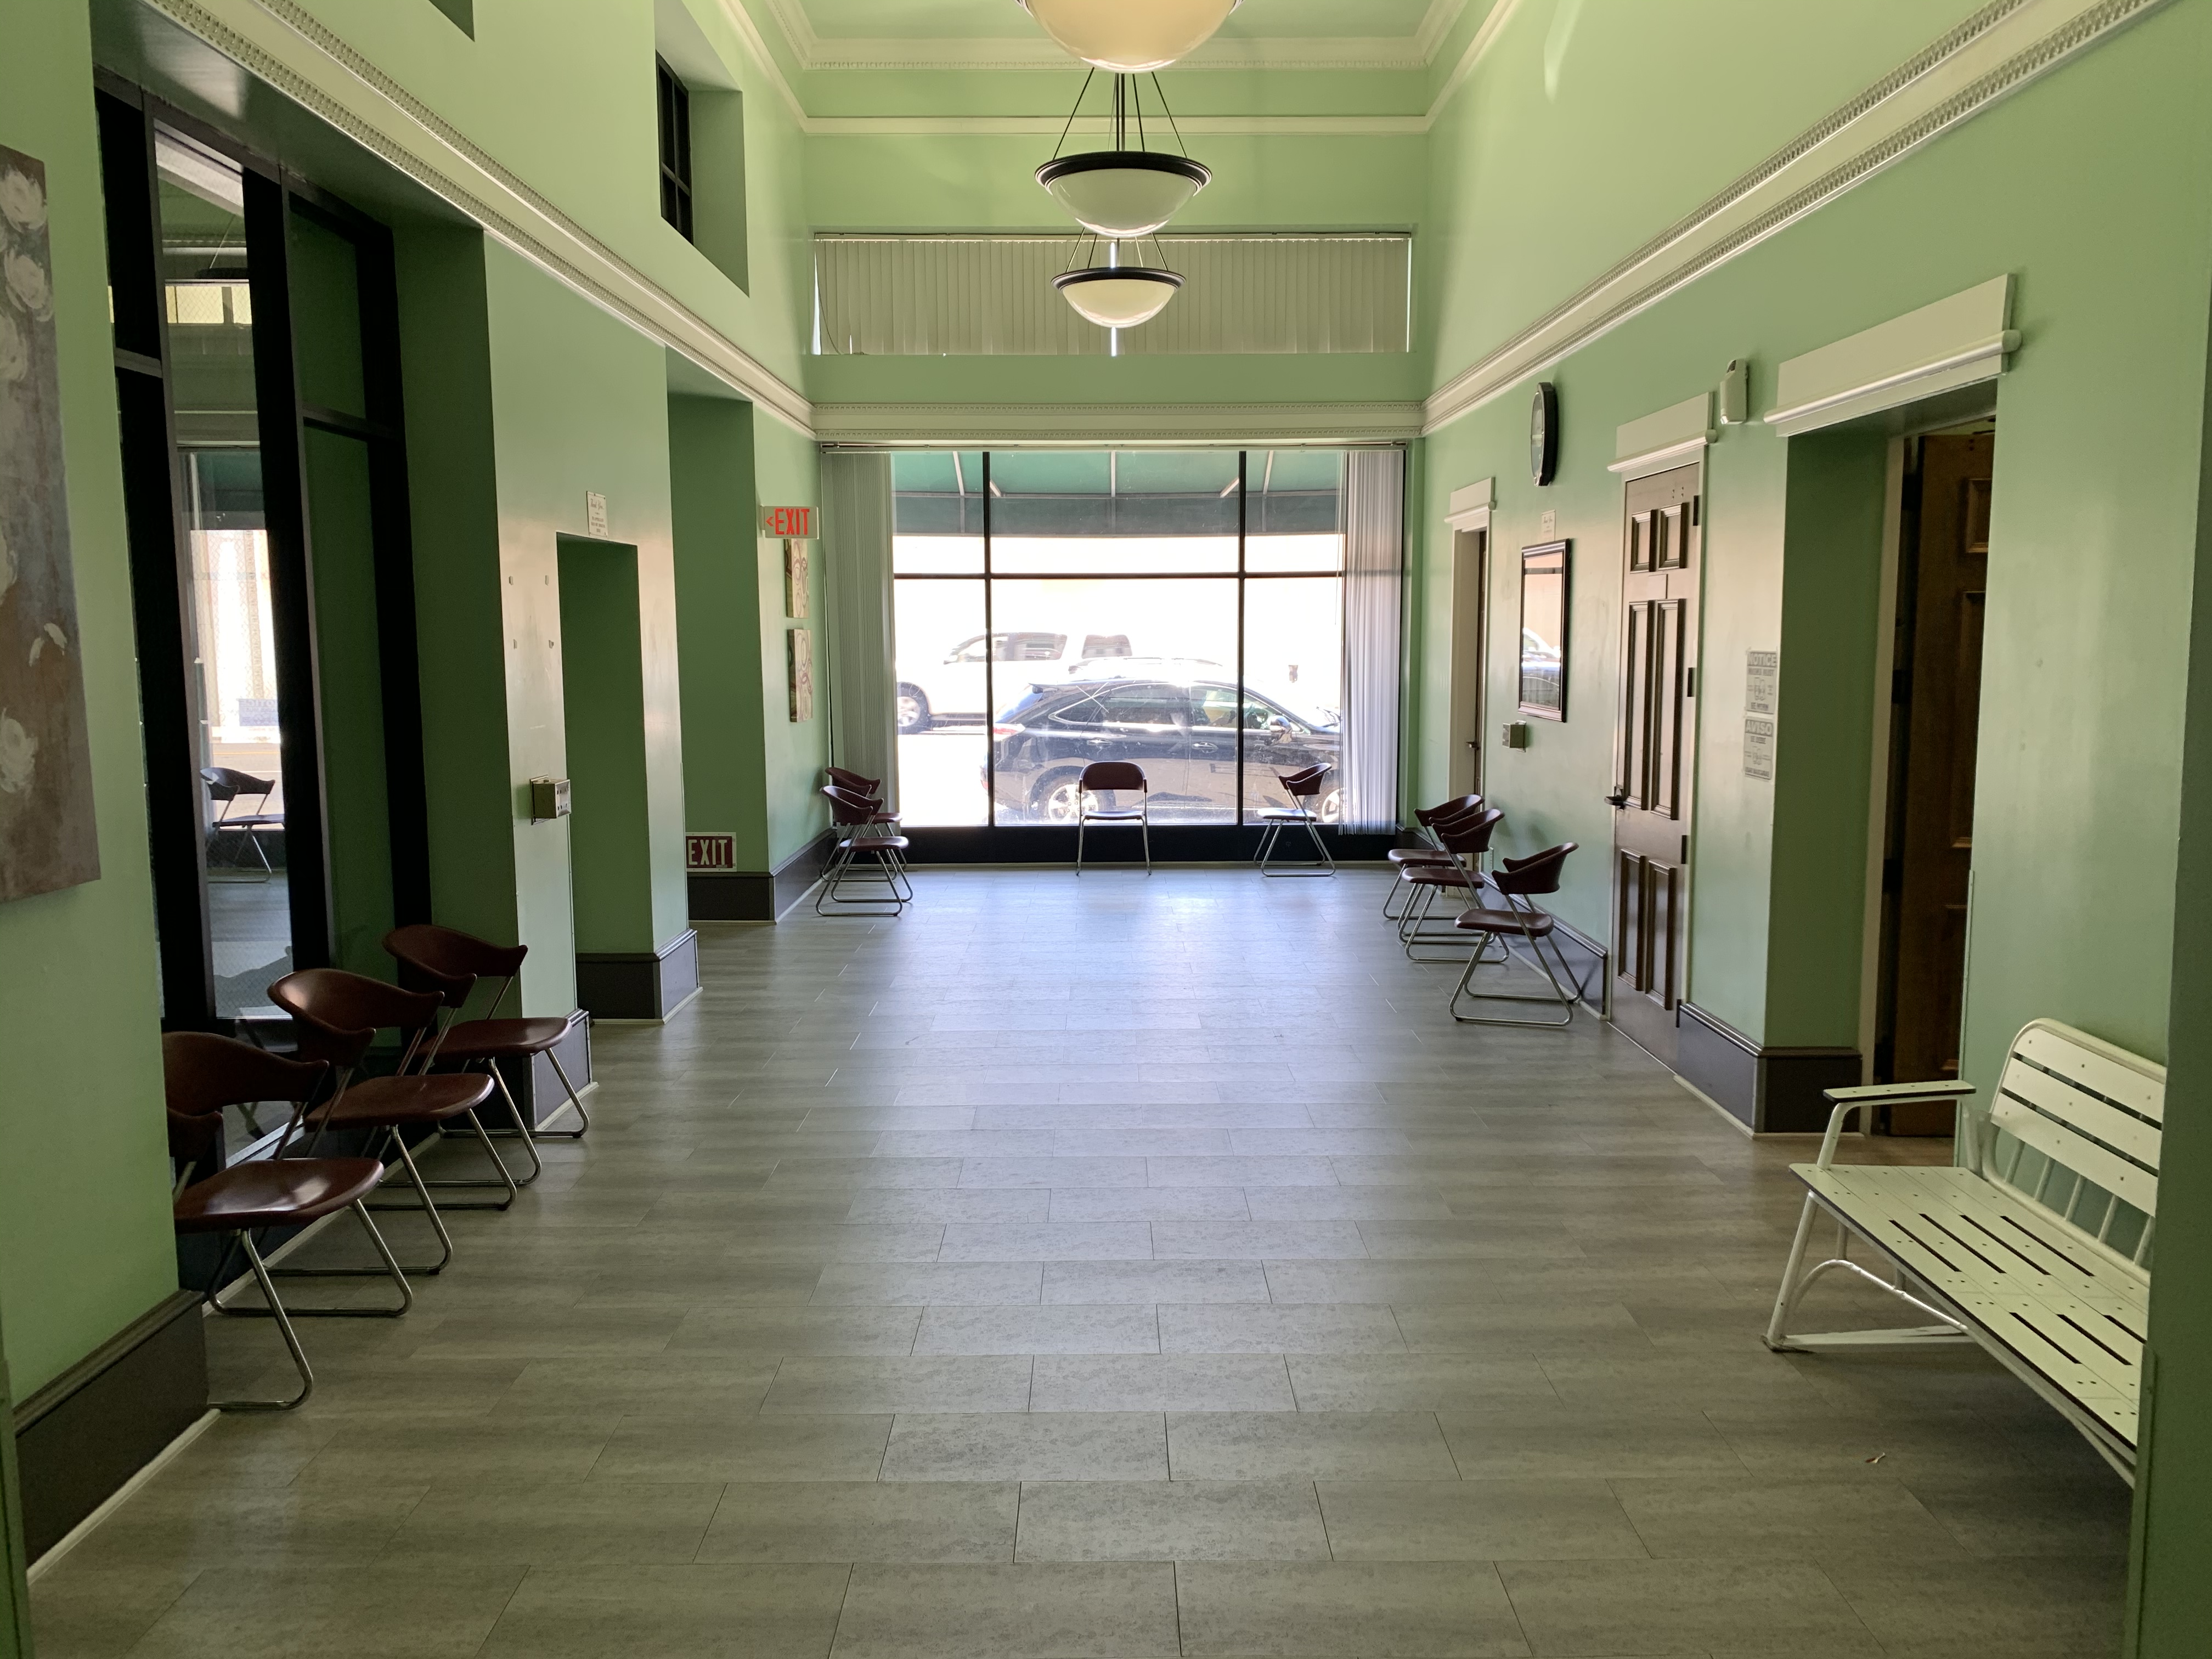 Image of the building lobby with entrances to the elevators